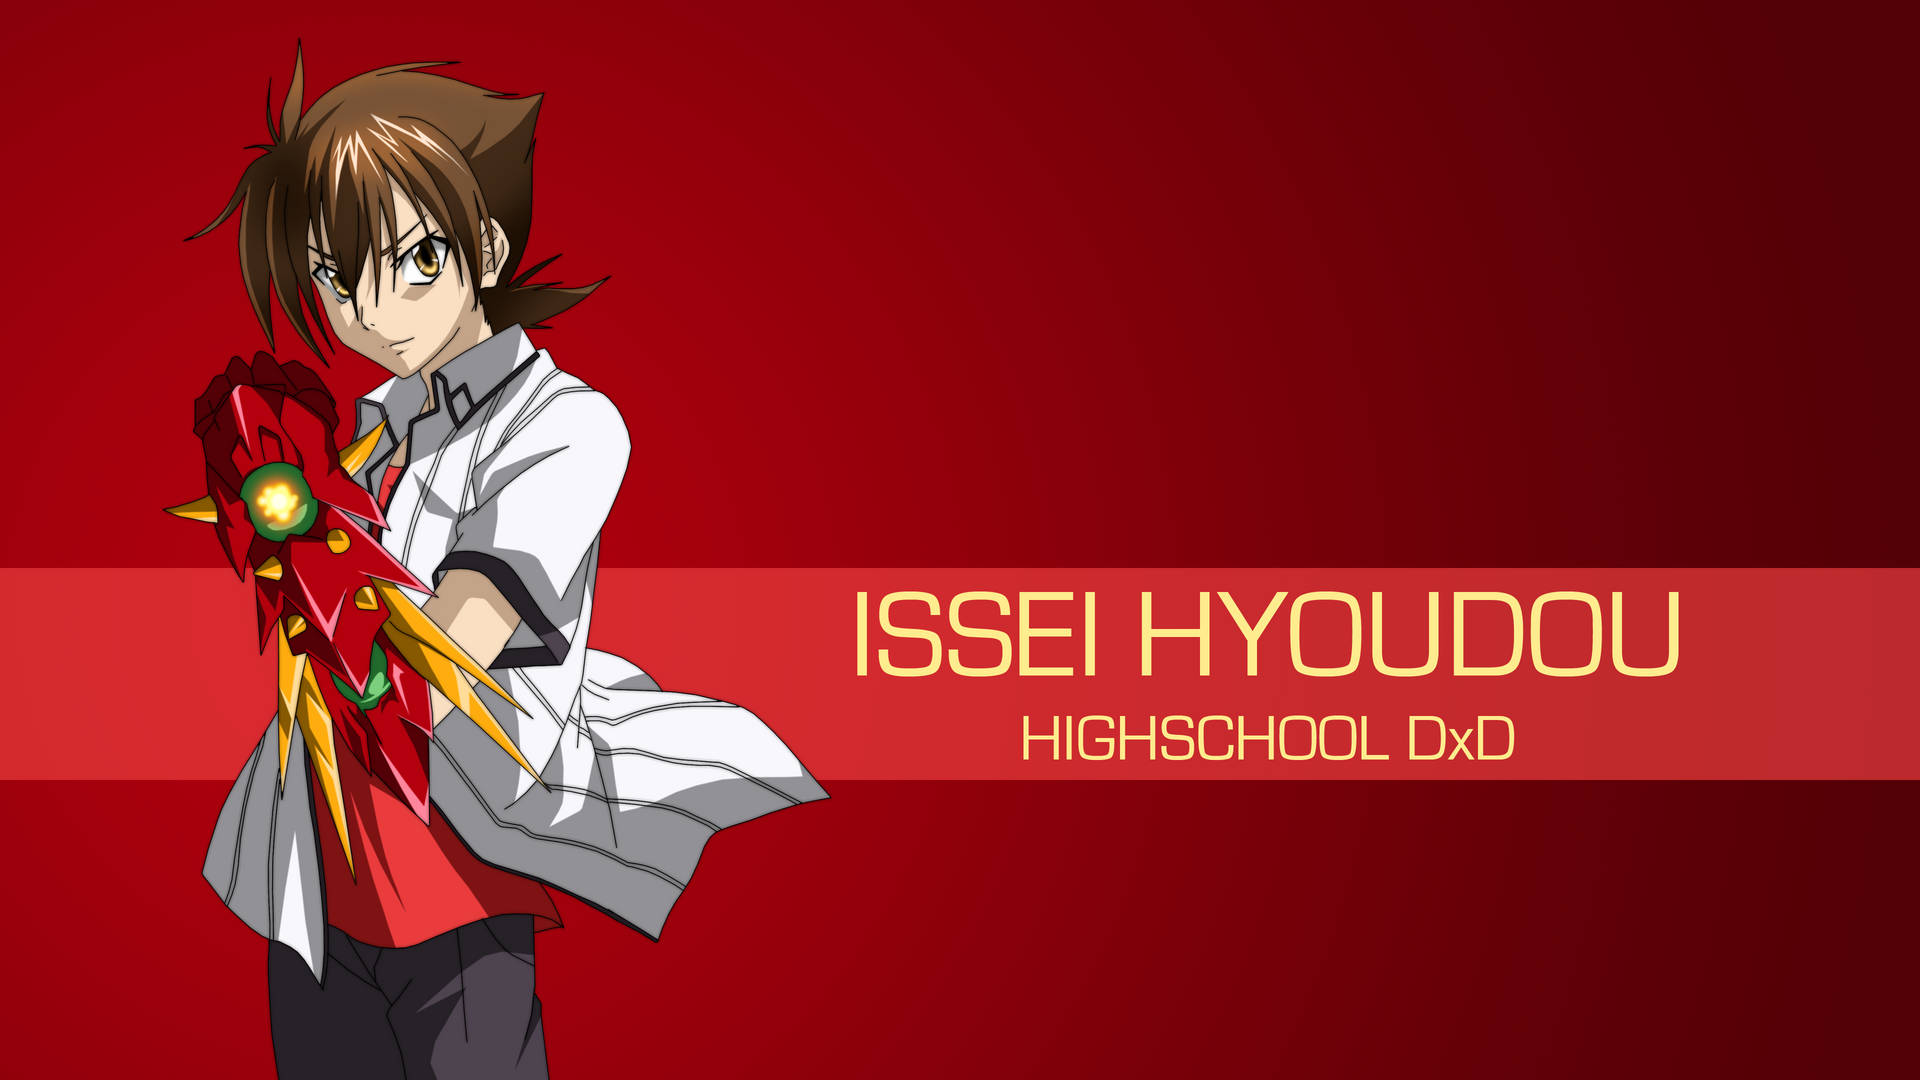 Issei Hyoudou High School DxD Red Wallpaper